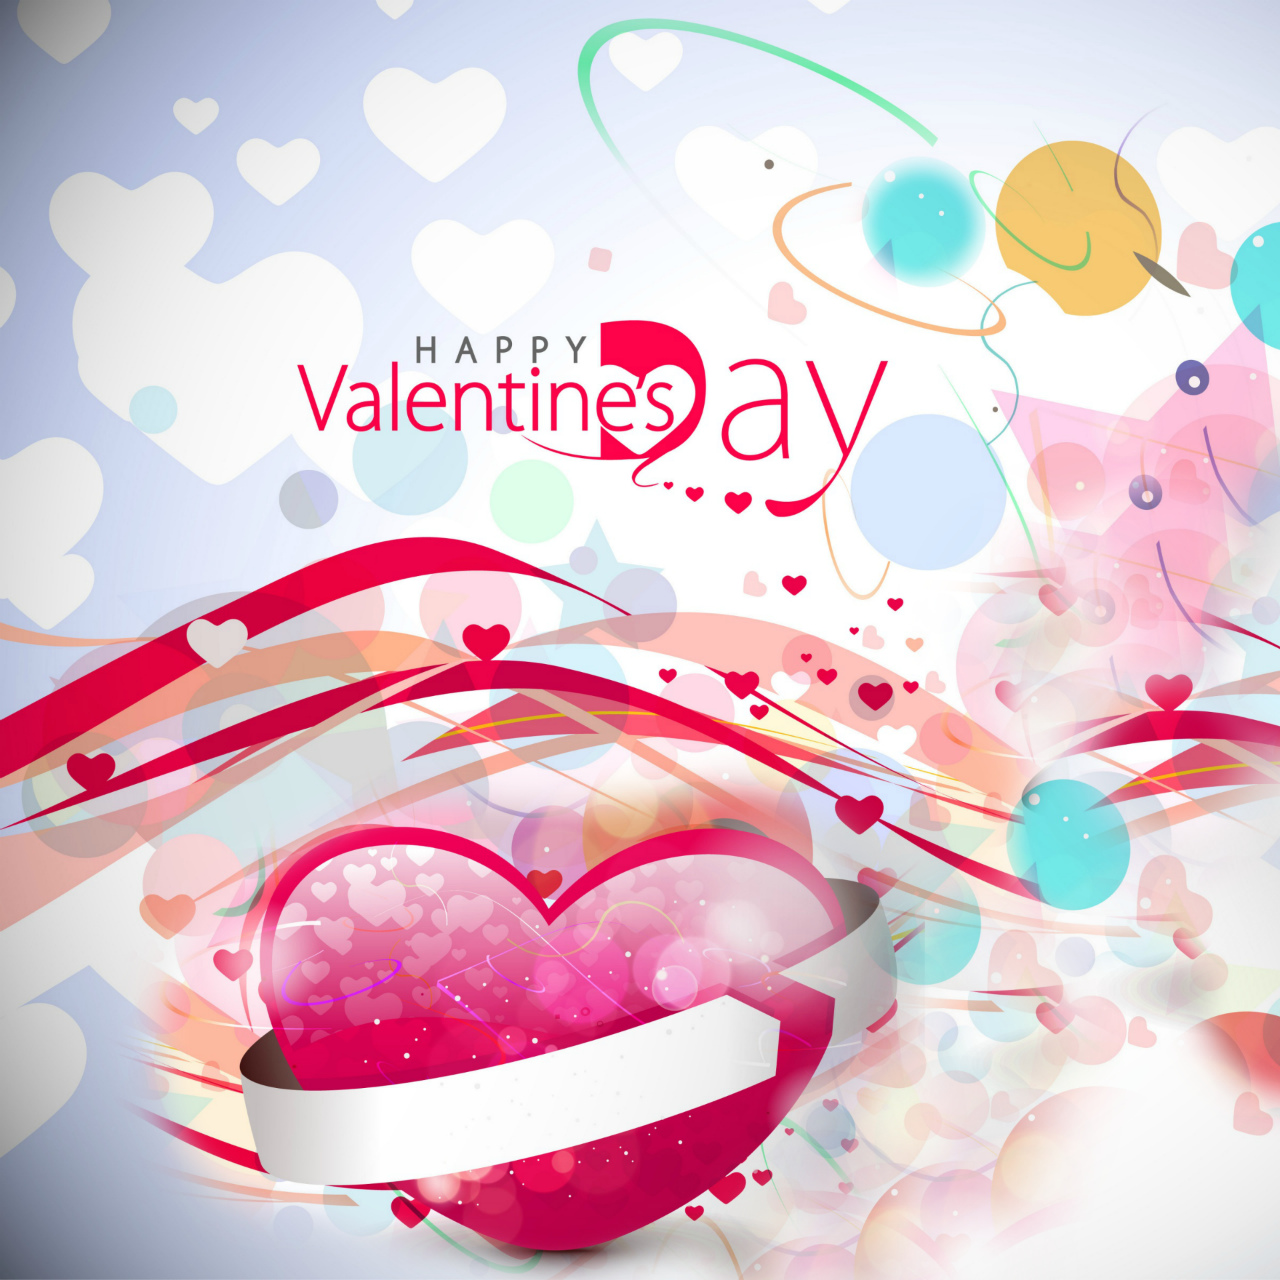 Velentines day wallpaper for the month of love (12)